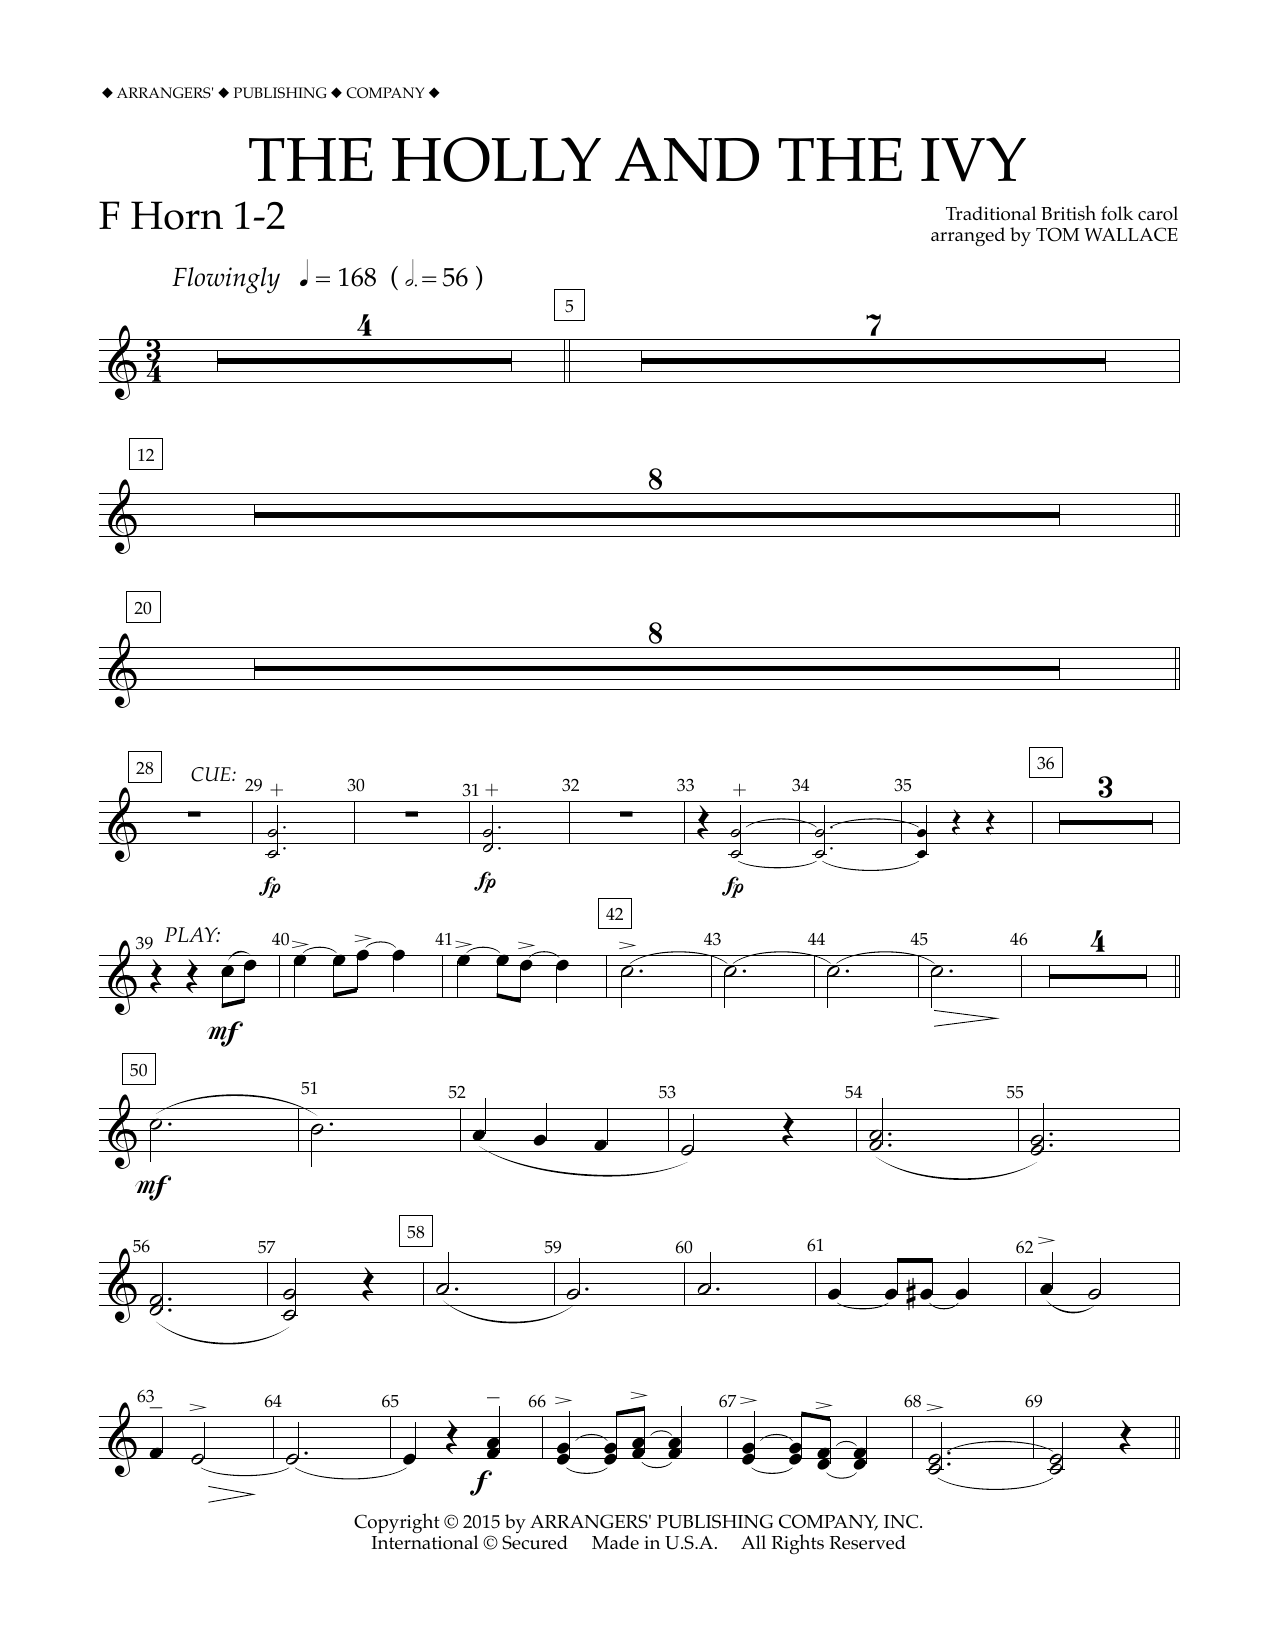 Download Tom Wallace The Holly and the Ivy - F Horn 1-2 Sheet Music